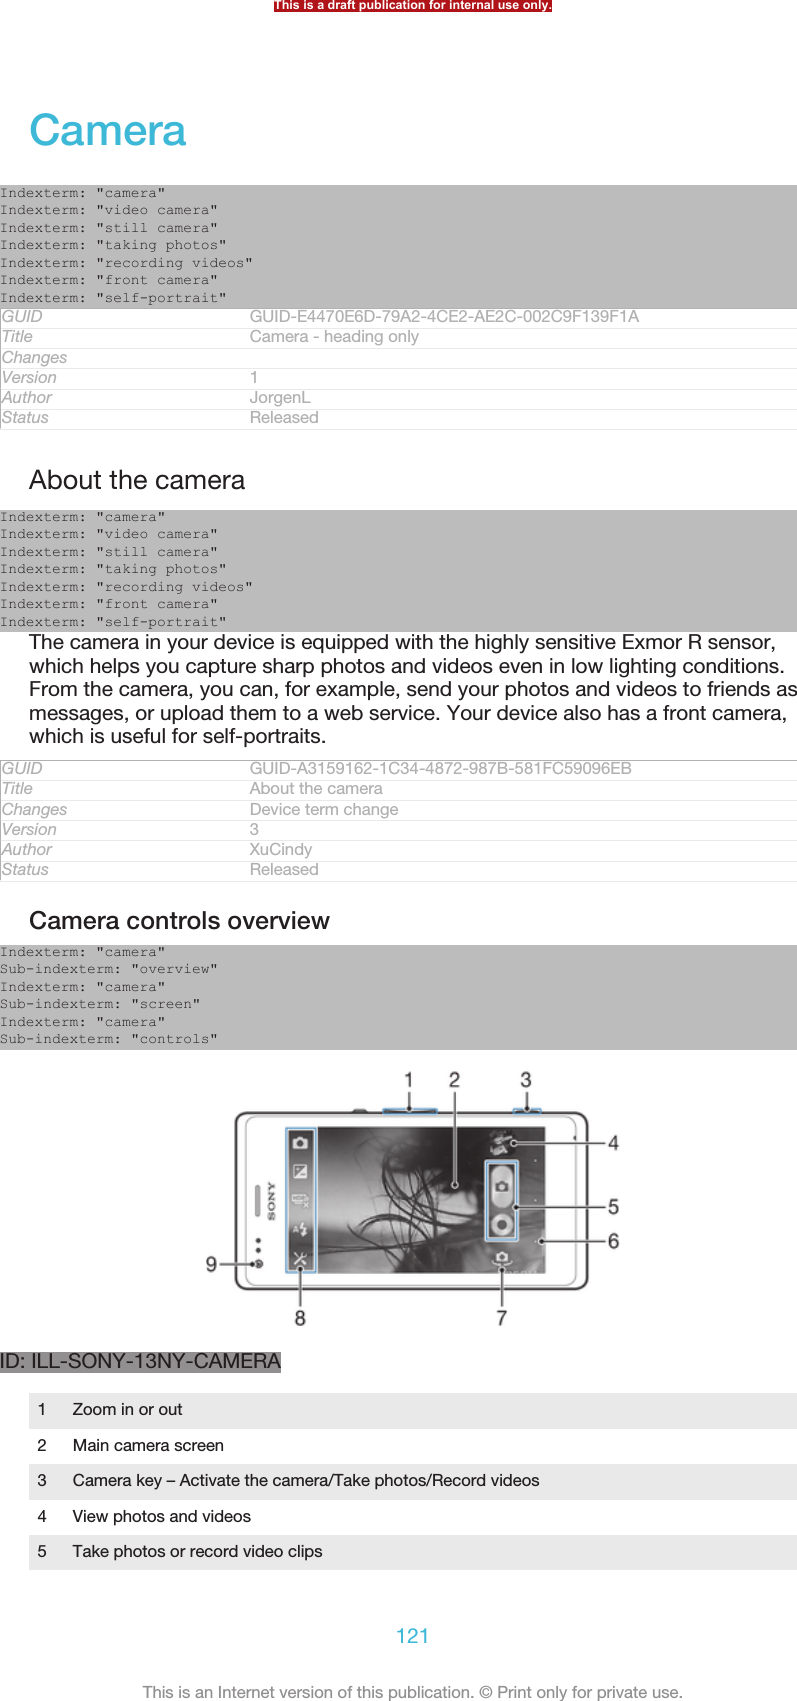 CameraIndexterm: &quot;camera&quot;Indexterm: &quot;video camera&quot;Indexterm: &quot;still camera&quot;Indexterm: &quot;taking photos&quot;Indexterm: &quot;recording videos&quot;Indexterm: &quot;front camera&quot;Indexterm: &quot;self-portrait&quot;GUID GUID-E4470E6D-79A2-4CE2-AE2C-002C9F139F1ATitle Camera - heading onlyChangesVersion 1Author JorgenLStatus ReleasedAbout the cameraIndexterm: &quot;camera&quot;Indexterm: &quot;video camera&quot;Indexterm: &quot;still camera&quot;Indexterm: &quot;taking photos&quot;Indexterm: &quot;recording videos&quot;Indexterm: &quot;front camera&quot;Indexterm: &quot;self-portrait&quot;The camera in your device is equipped with the highly sensitive Exmor R sensor,which helps you capture sharp photos and videos even in low lighting conditions.From the camera, you can, for example, send your photos and videos to friends asmessages, or upload them to a web service. Your device also has a front camera,which is useful for self-portraits.GUID GUID-A3159162-1C34-4872-987B-581FC59096EBTitle About the cameraChanges Device term changeVersion 3Author XuCindyStatus ReleasedCamera controls overviewIndexterm: &quot;camera&quot;Sub-indexterm: &quot;overview&quot;Indexterm: &quot;camera&quot;Sub-indexterm: &quot;screen&quot;Indexterm: &quot;camera&quot;Sub-indexterm: &quot;controls&quot;ID: ILL-SONY-13NY-CAMERA1Zoom in or out2 Main camera screen3 Camera key – Activate the camera/Take photos/Record videos4 View photos and videos5 Take photos or record video clipsThis is a draft publication for internal use only.121This is an Internet version of this publication. © Print only for private use.